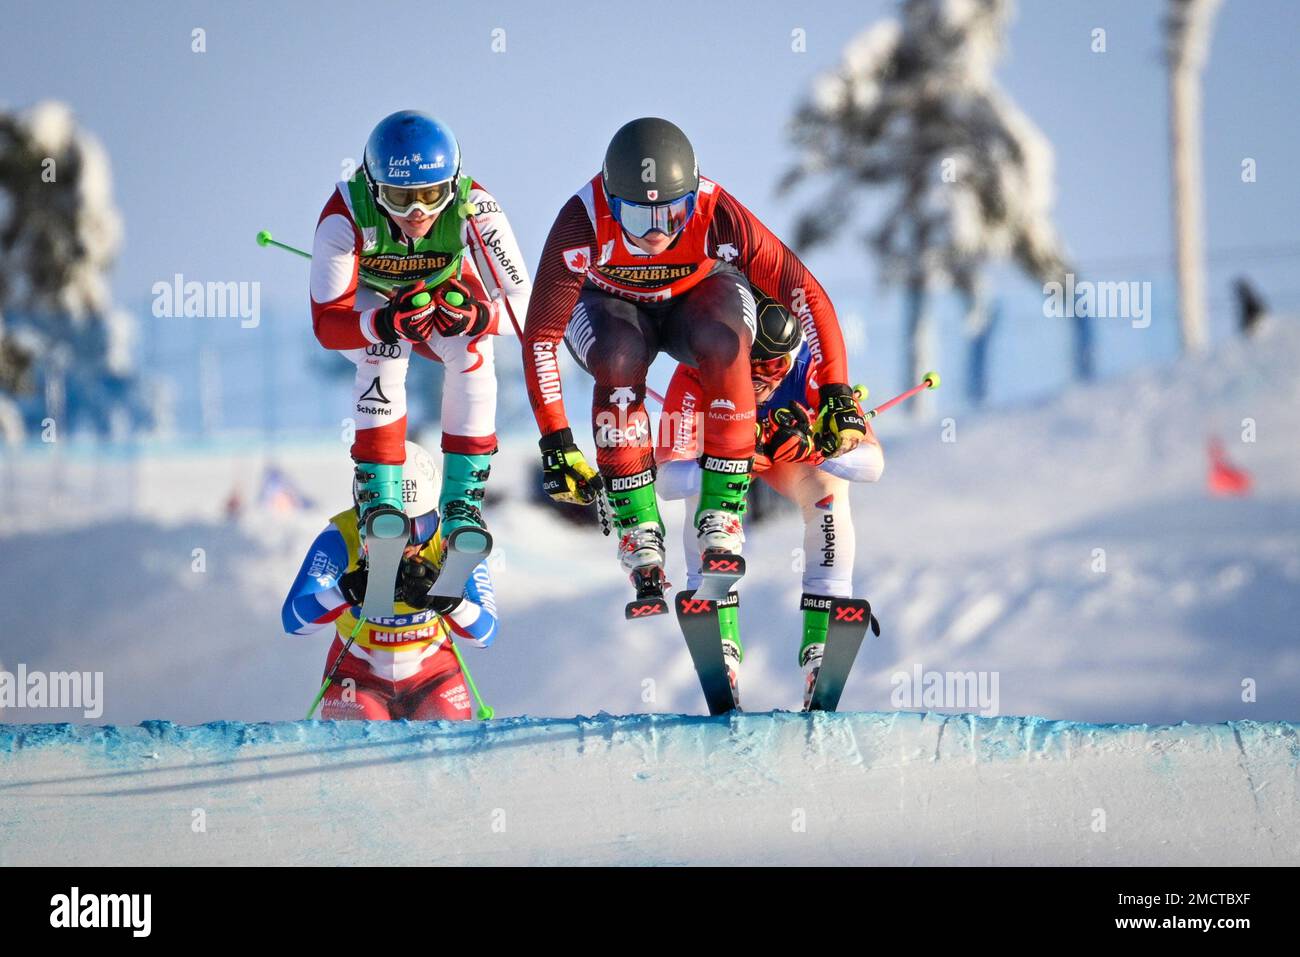 Canada's Tiana Gairns (red), Austria's Sonja Gigler (green), France's Marielle Berger Sabbatel (yellow) and Switzerland's Sixtine Cousin (blue) in action during the women's Ski Cross Small final of the FIS Freestyle Skiing World Cup in Idre, Sweden, on Jan. 22, 2023.Photo:  Anders Wiklund / TT / code 10040 Stock Photo